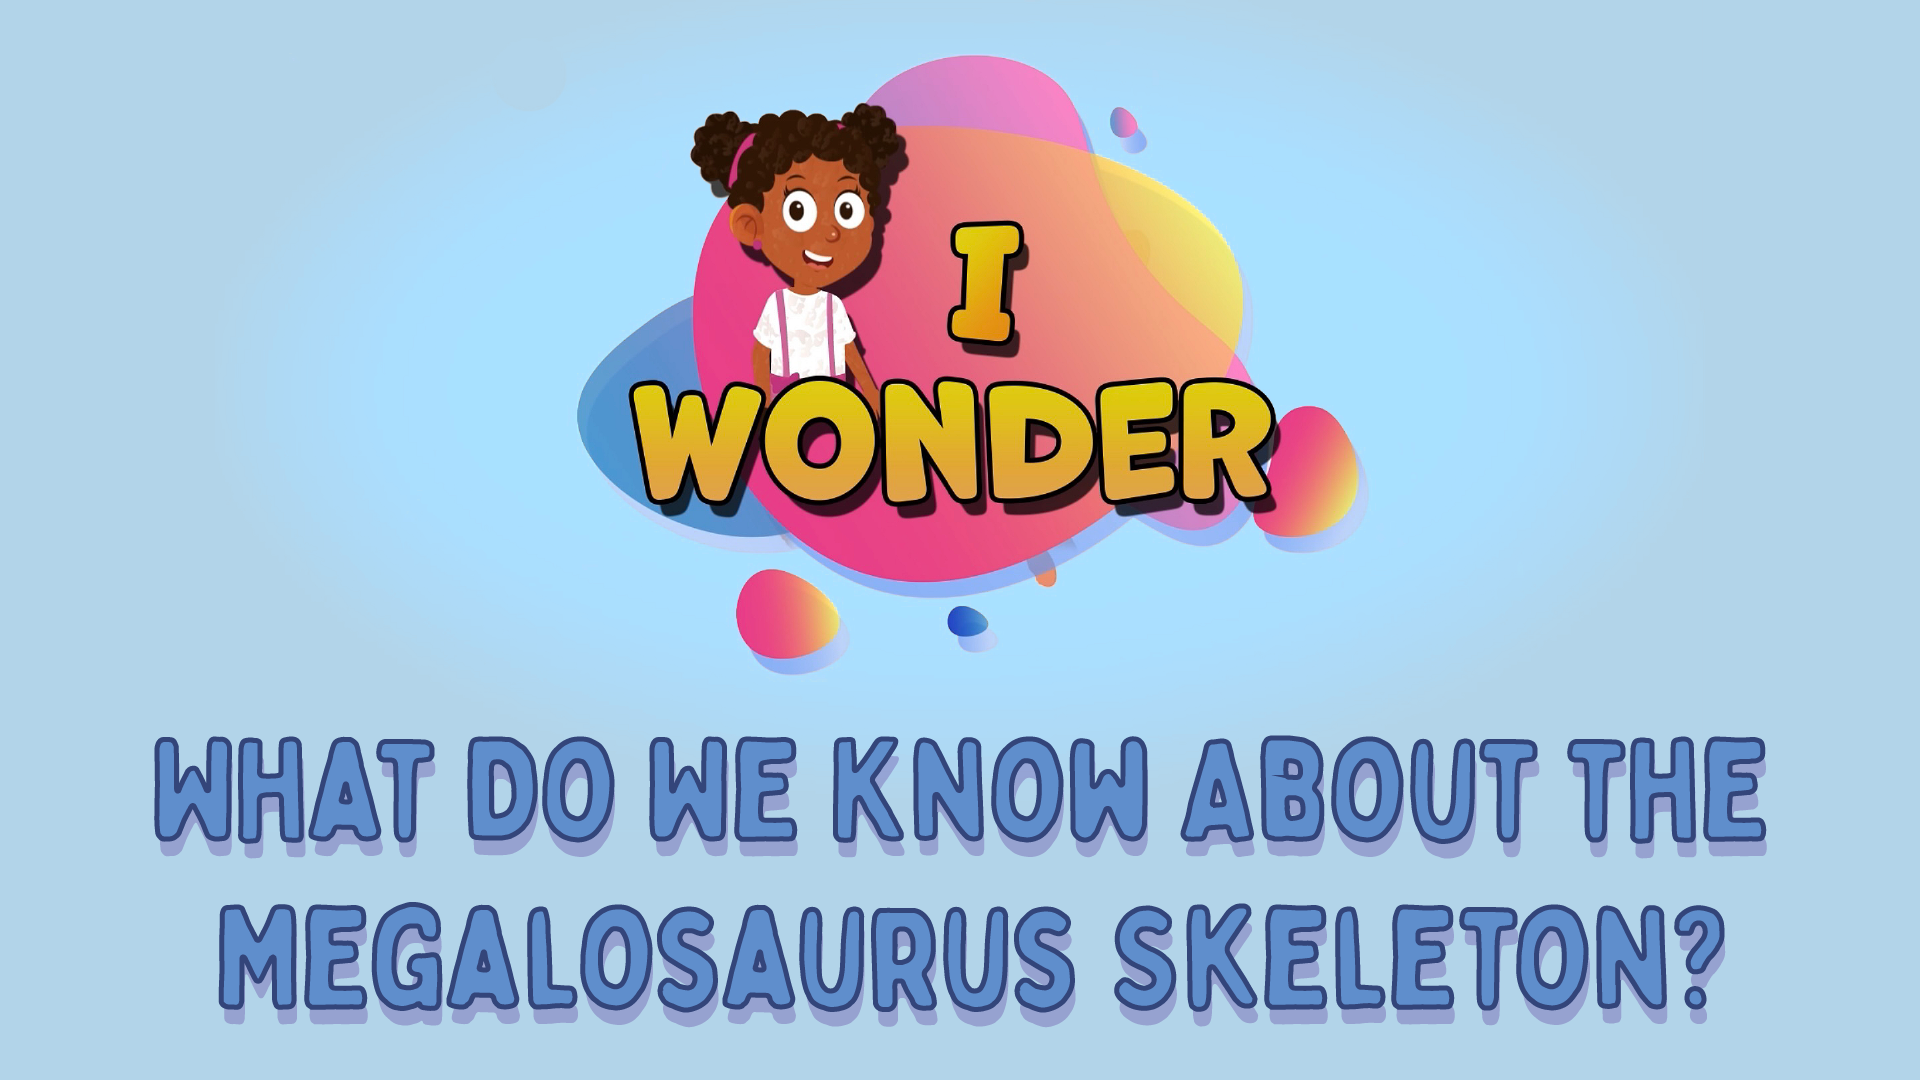 What Do We Know About the Megalosaurus Skeleton?